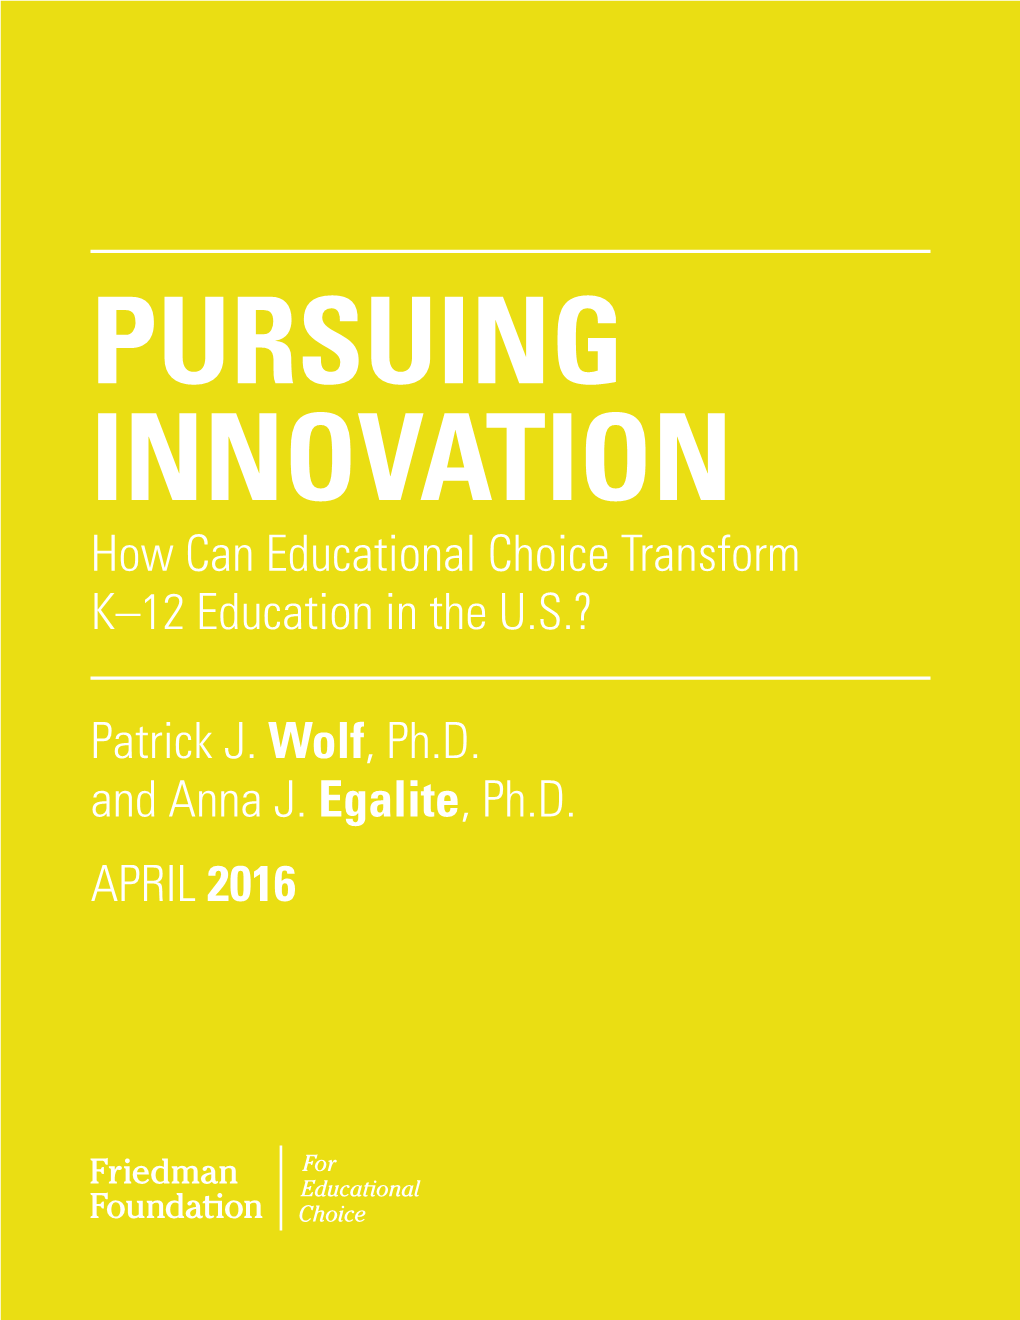 How Can Educational Choice Transform K–12 Education in the U.S.?